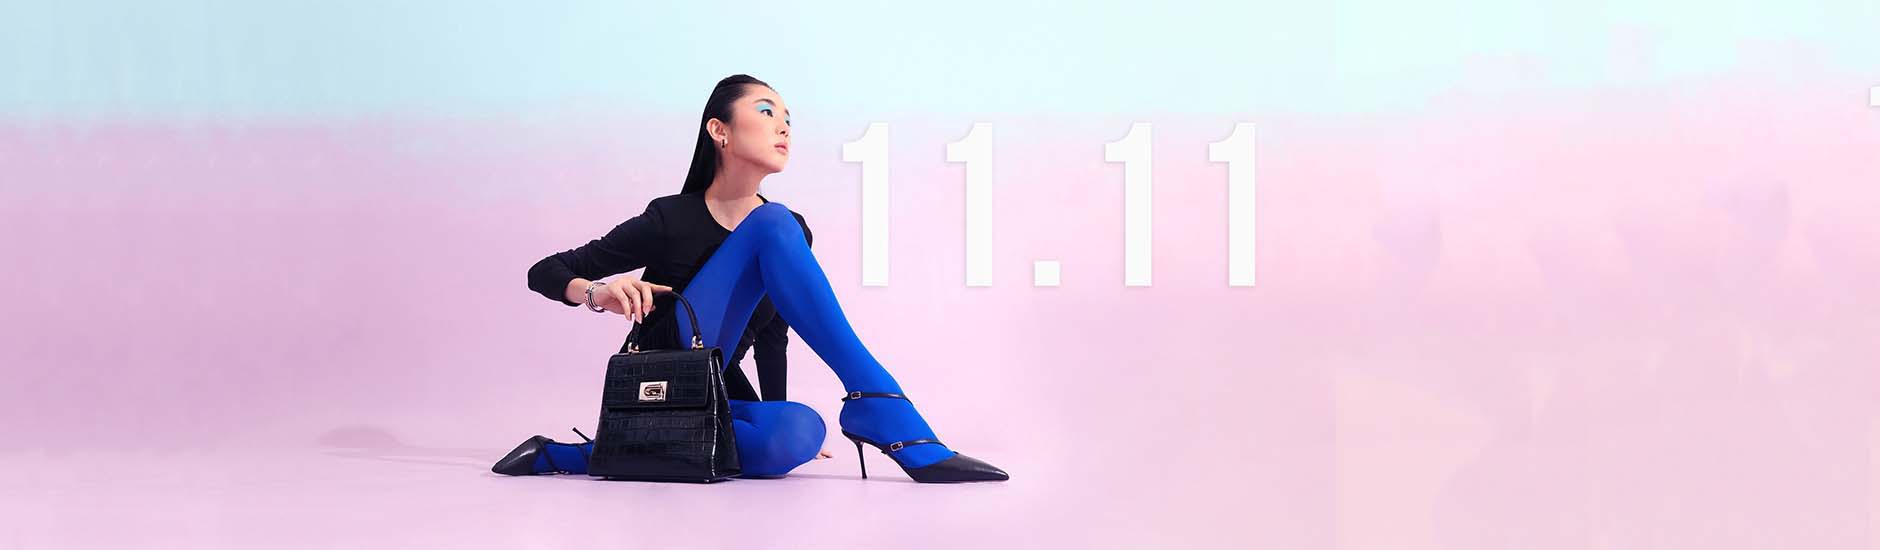 Amplify Your Style This 11.11